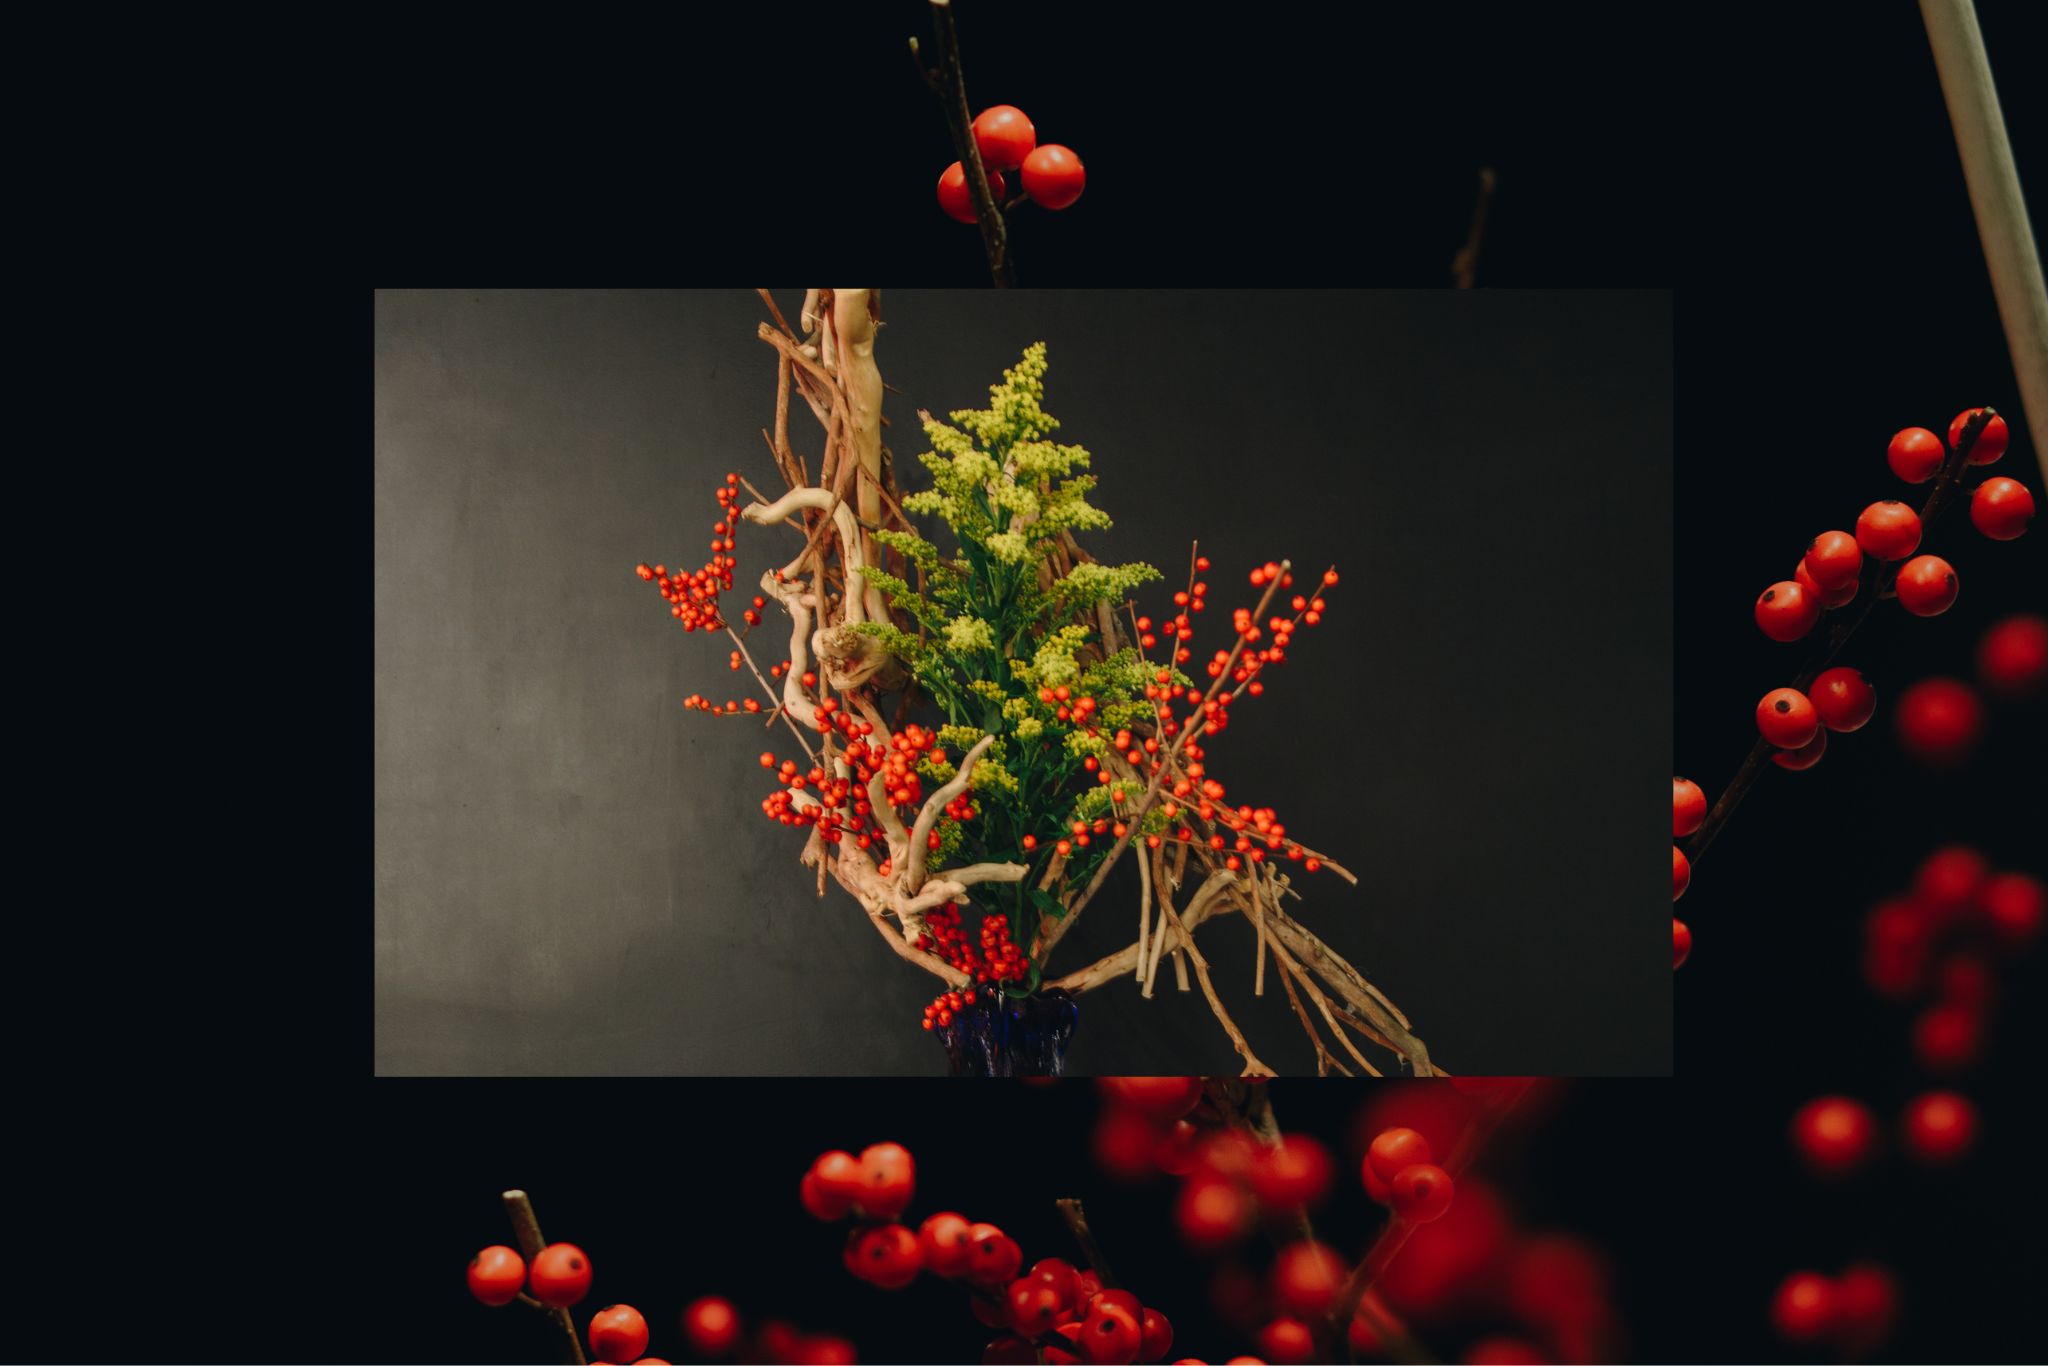 ikebana floral artist work of red buds, wood, and greenery in a vase against a black background